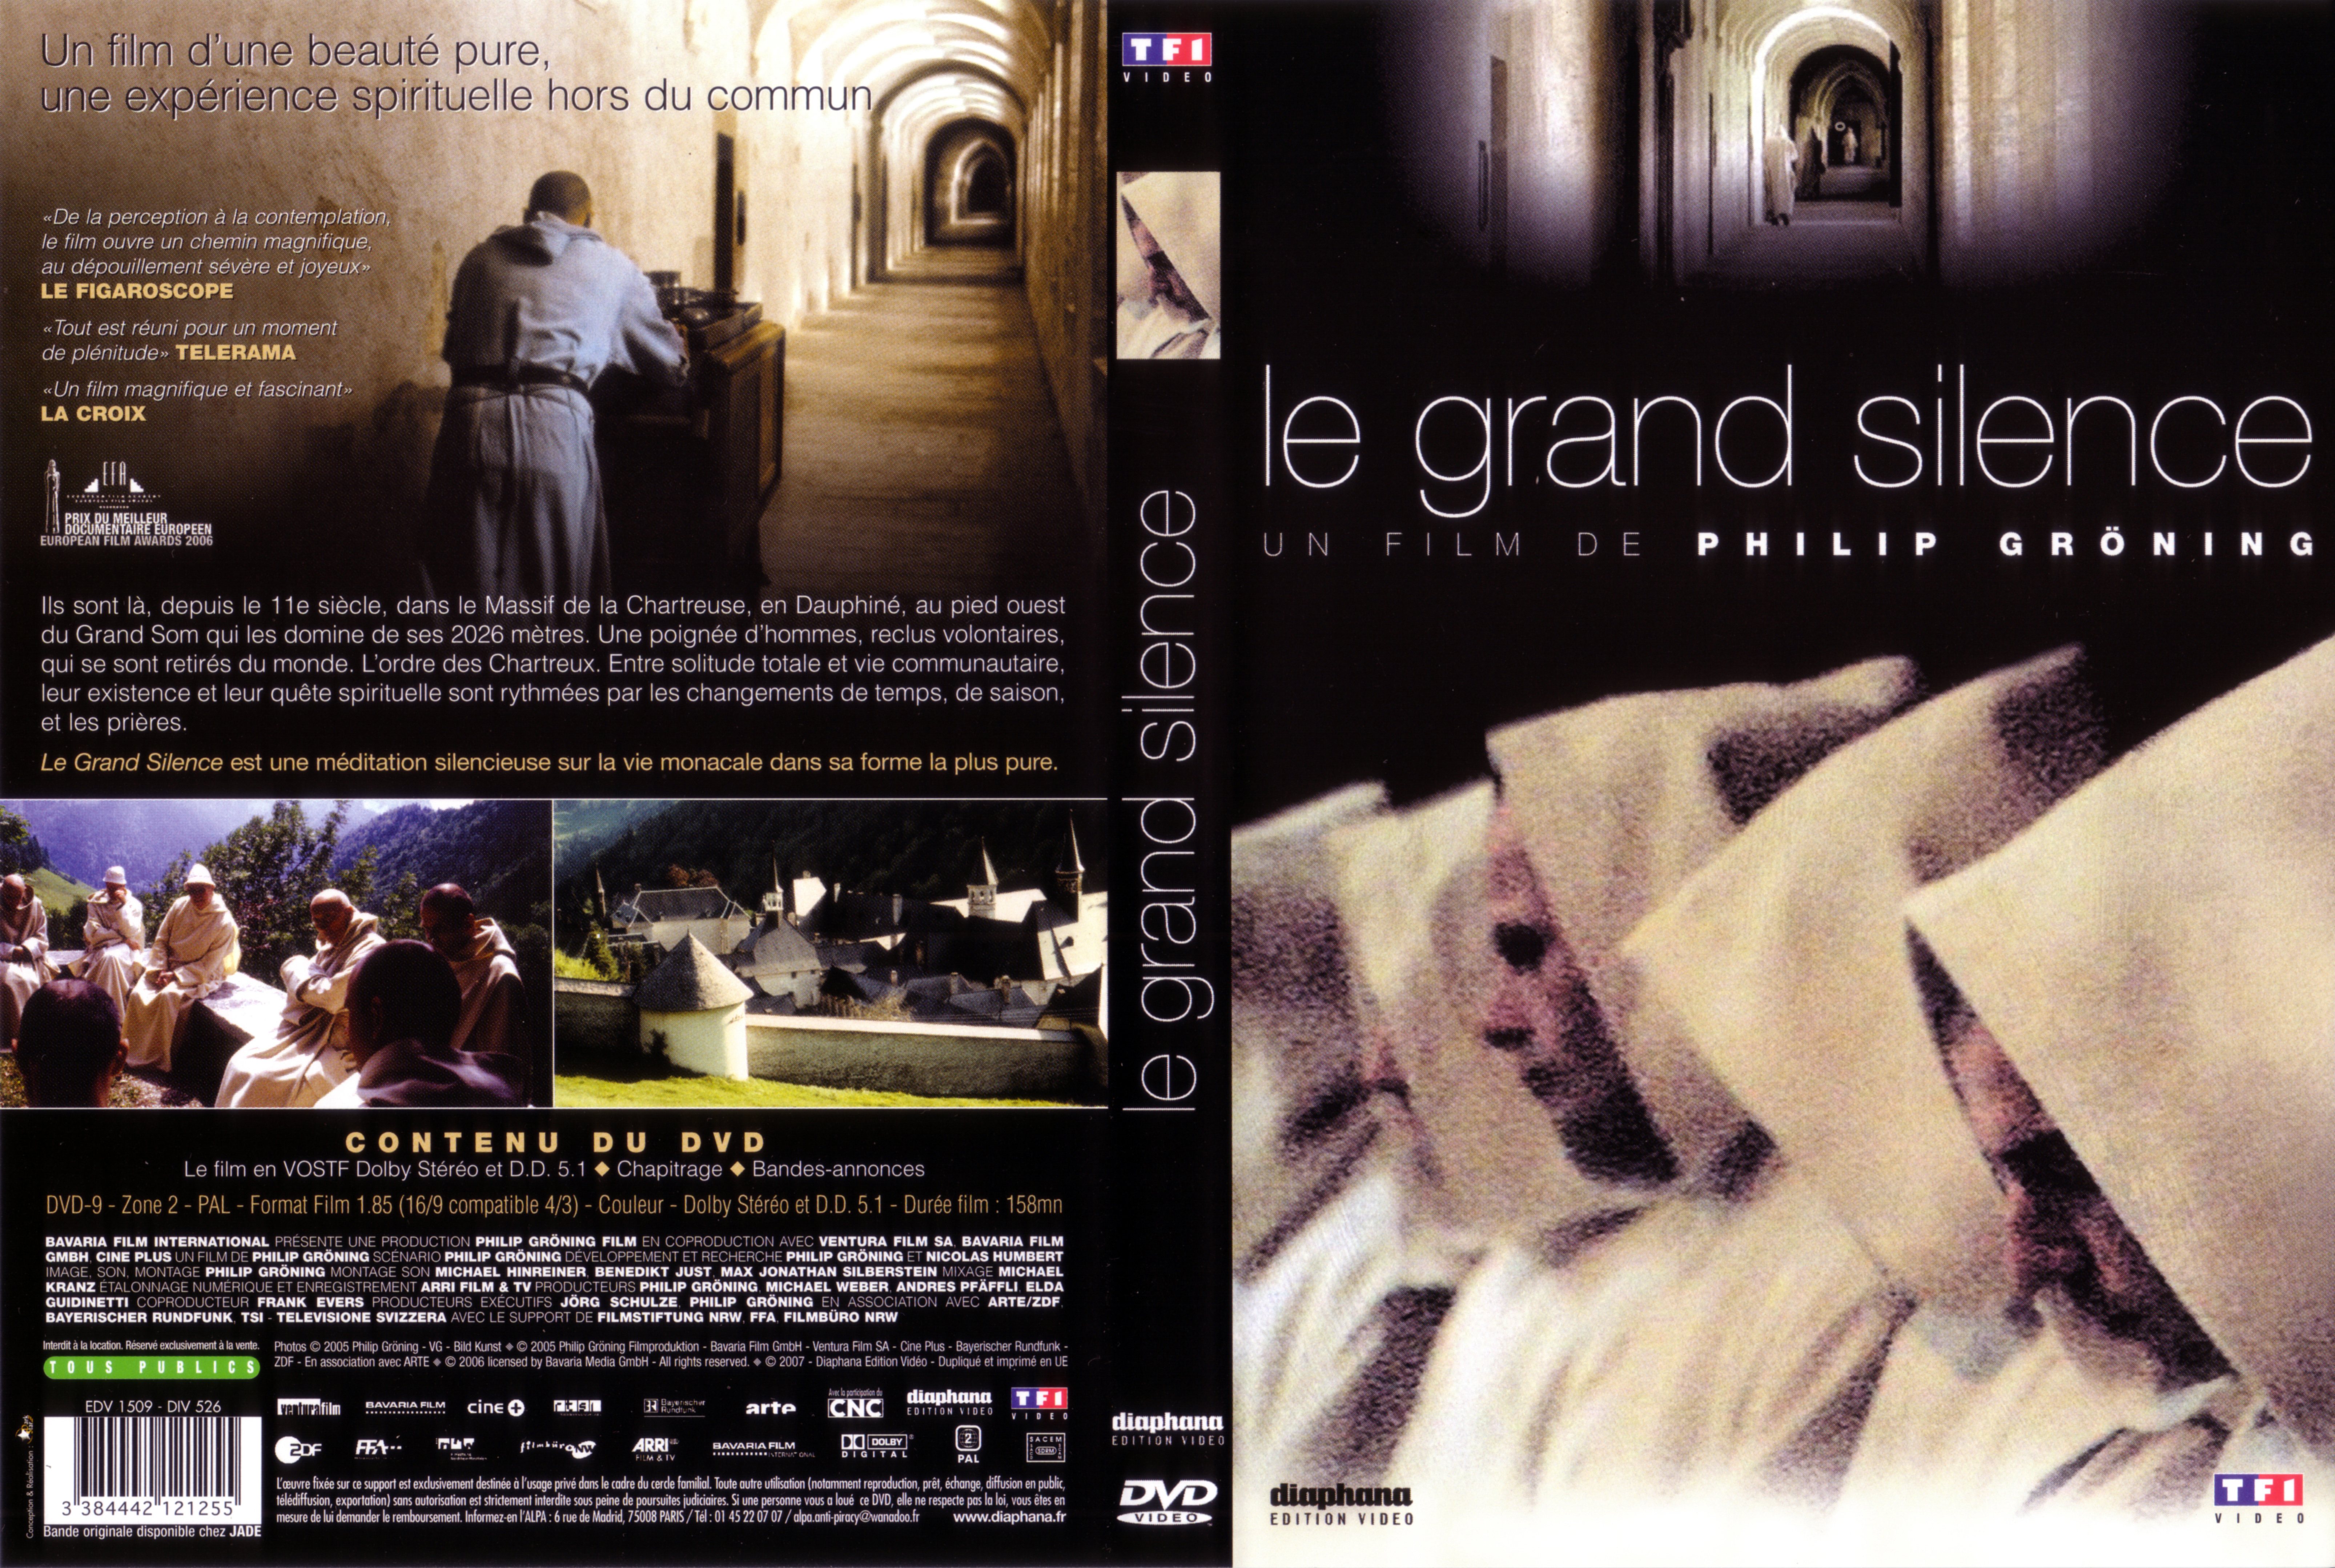 Jaquette DVD Le grand silence (Documentaire) v2